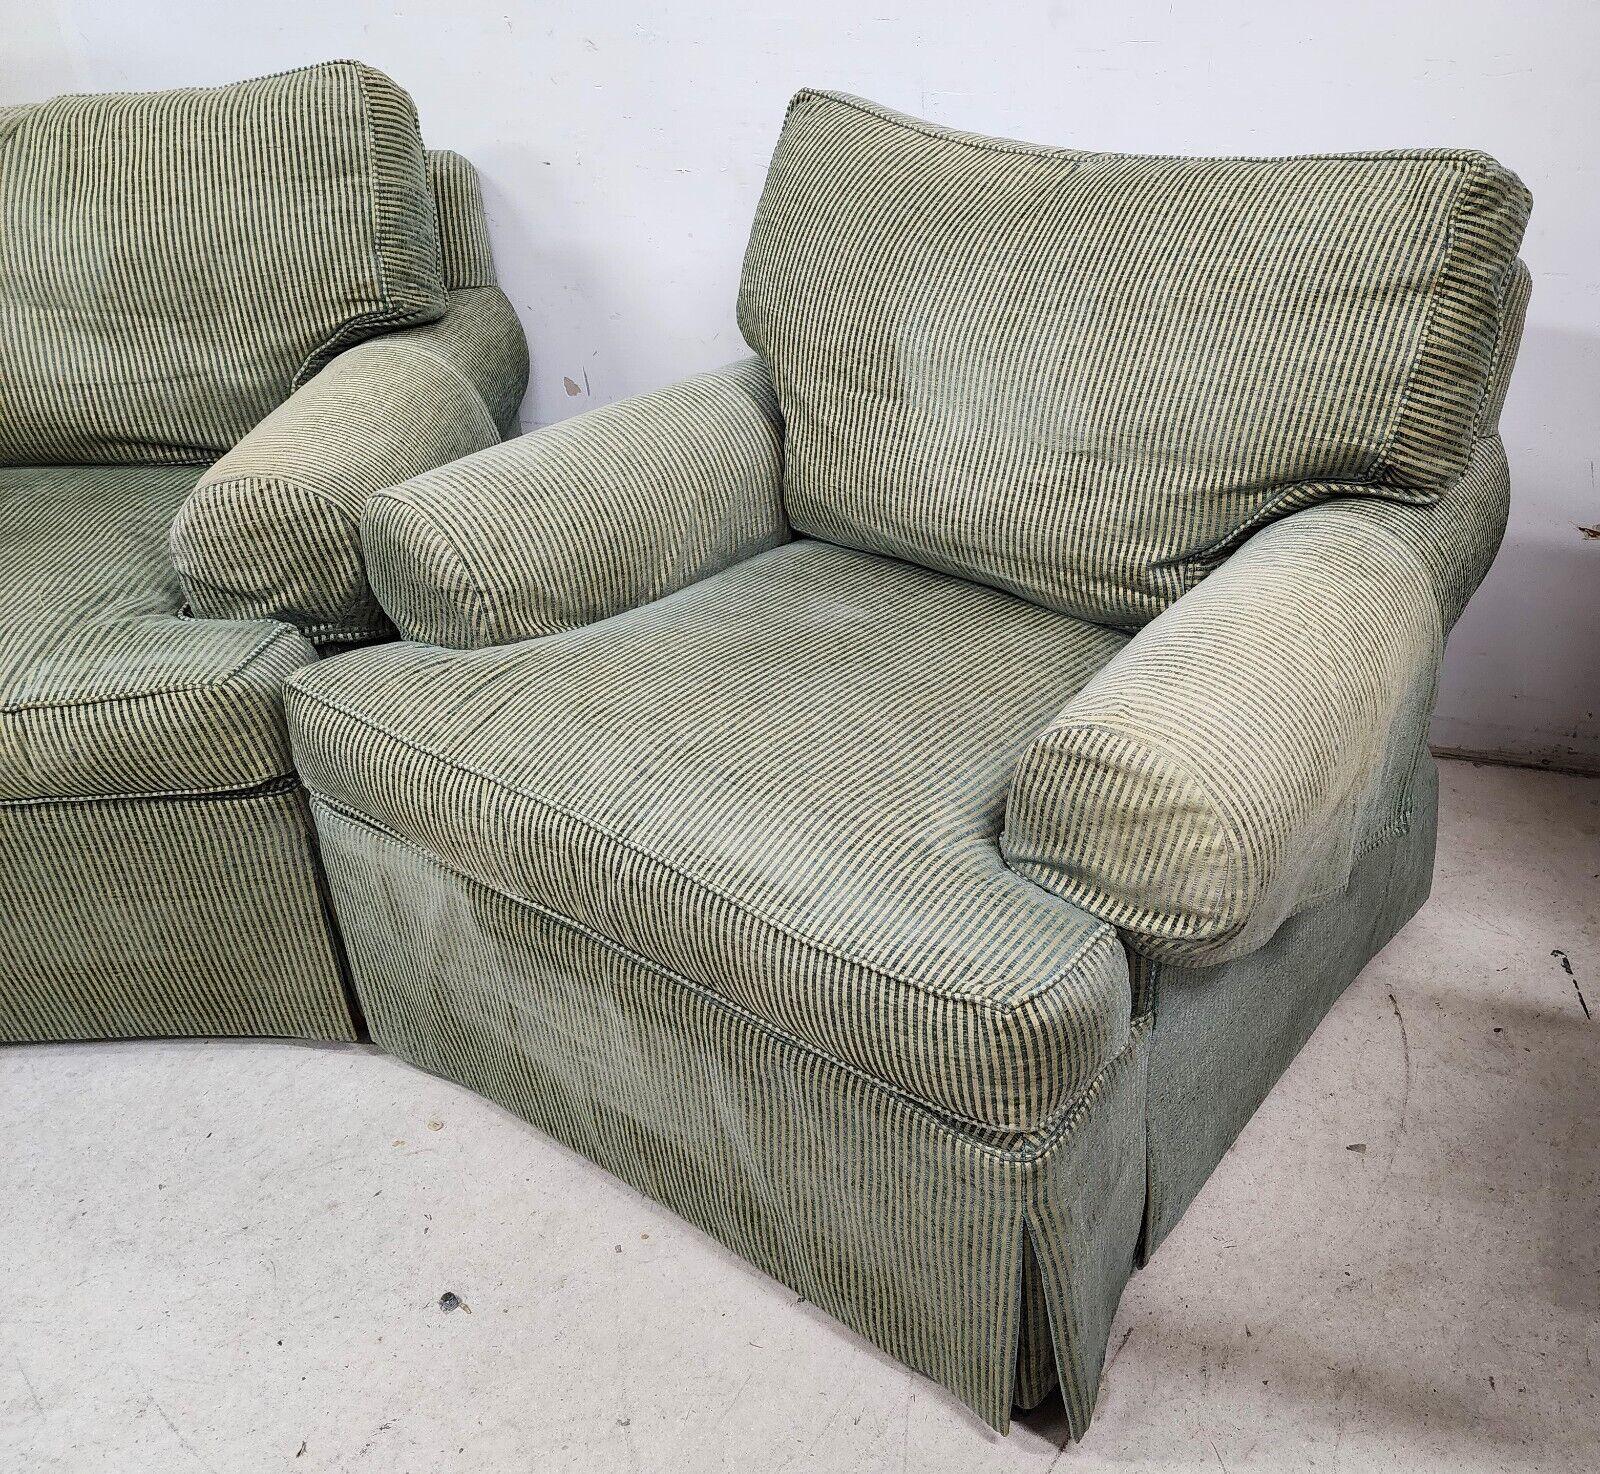 For FULL item description click on CONTINUE READING at the bottom of this page.

Offering One Of Our Recent Palm Beach Estate Fine Furniture Acquisitions Of An 
Exceptional Pair of Oversized Lounge Chairs by HICKORY CHAIR Sovereign Upholstery
Fabric